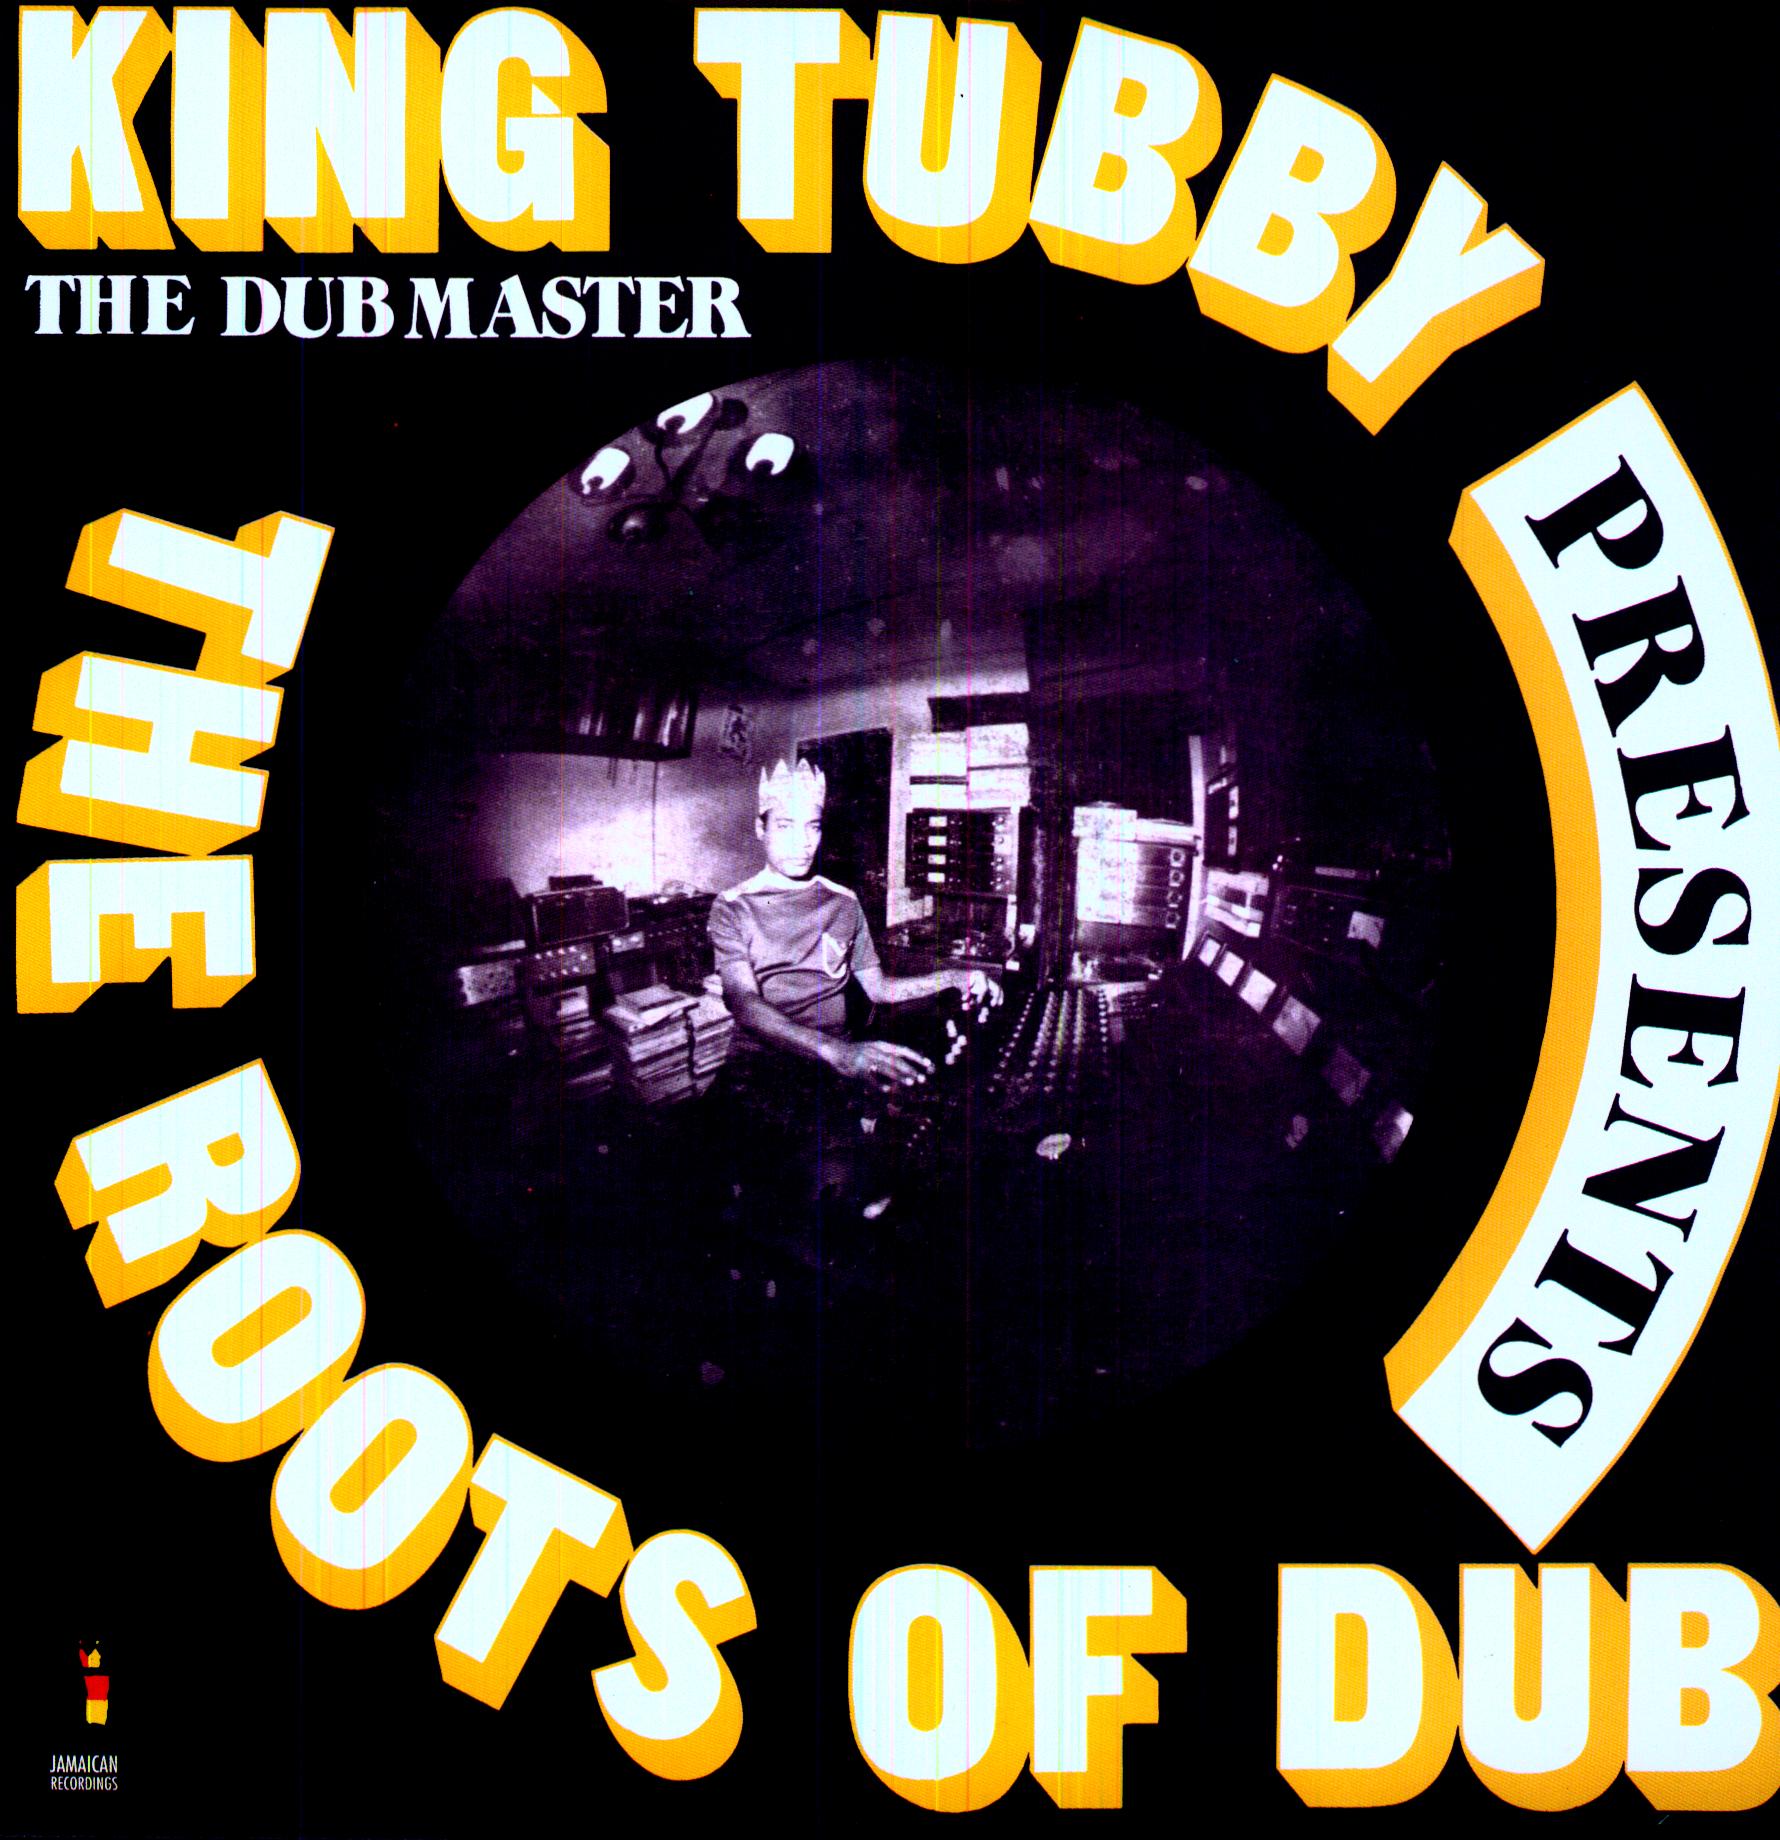 ROOTS OF DUB